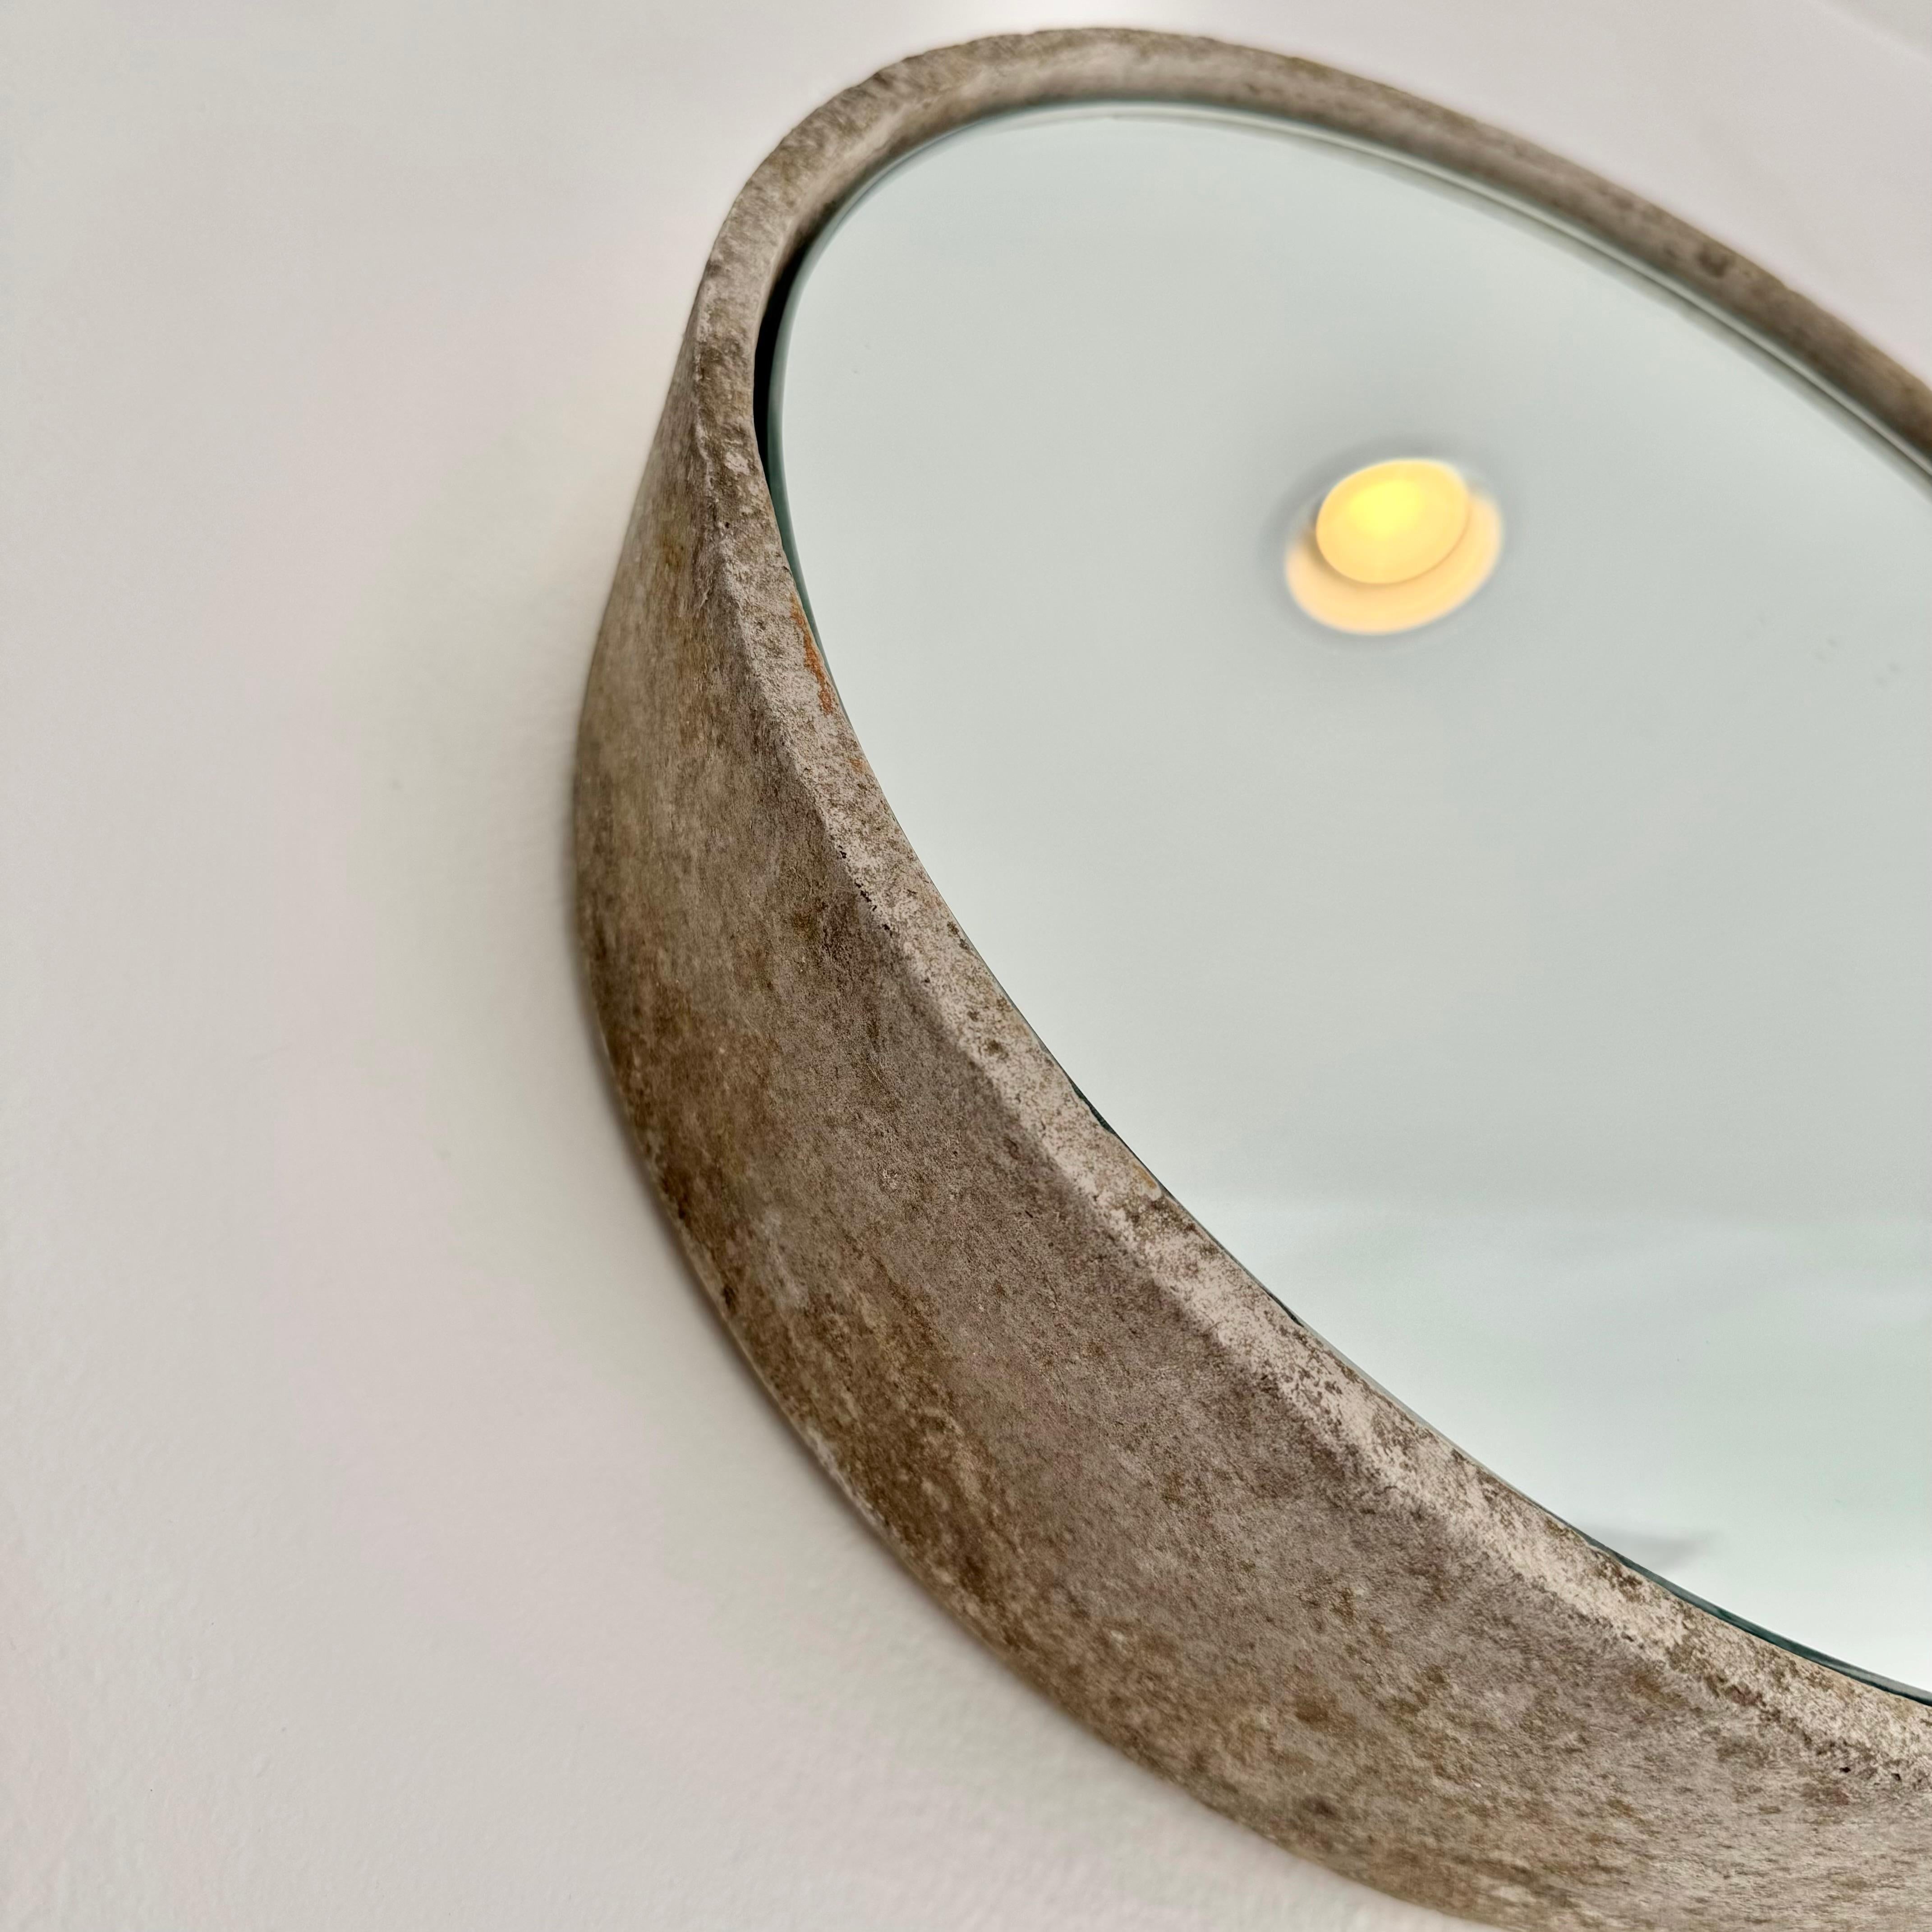 Hand-Crafted Circular Willy Guhl Concrete Mirror, 1960s Switzerland For Sale